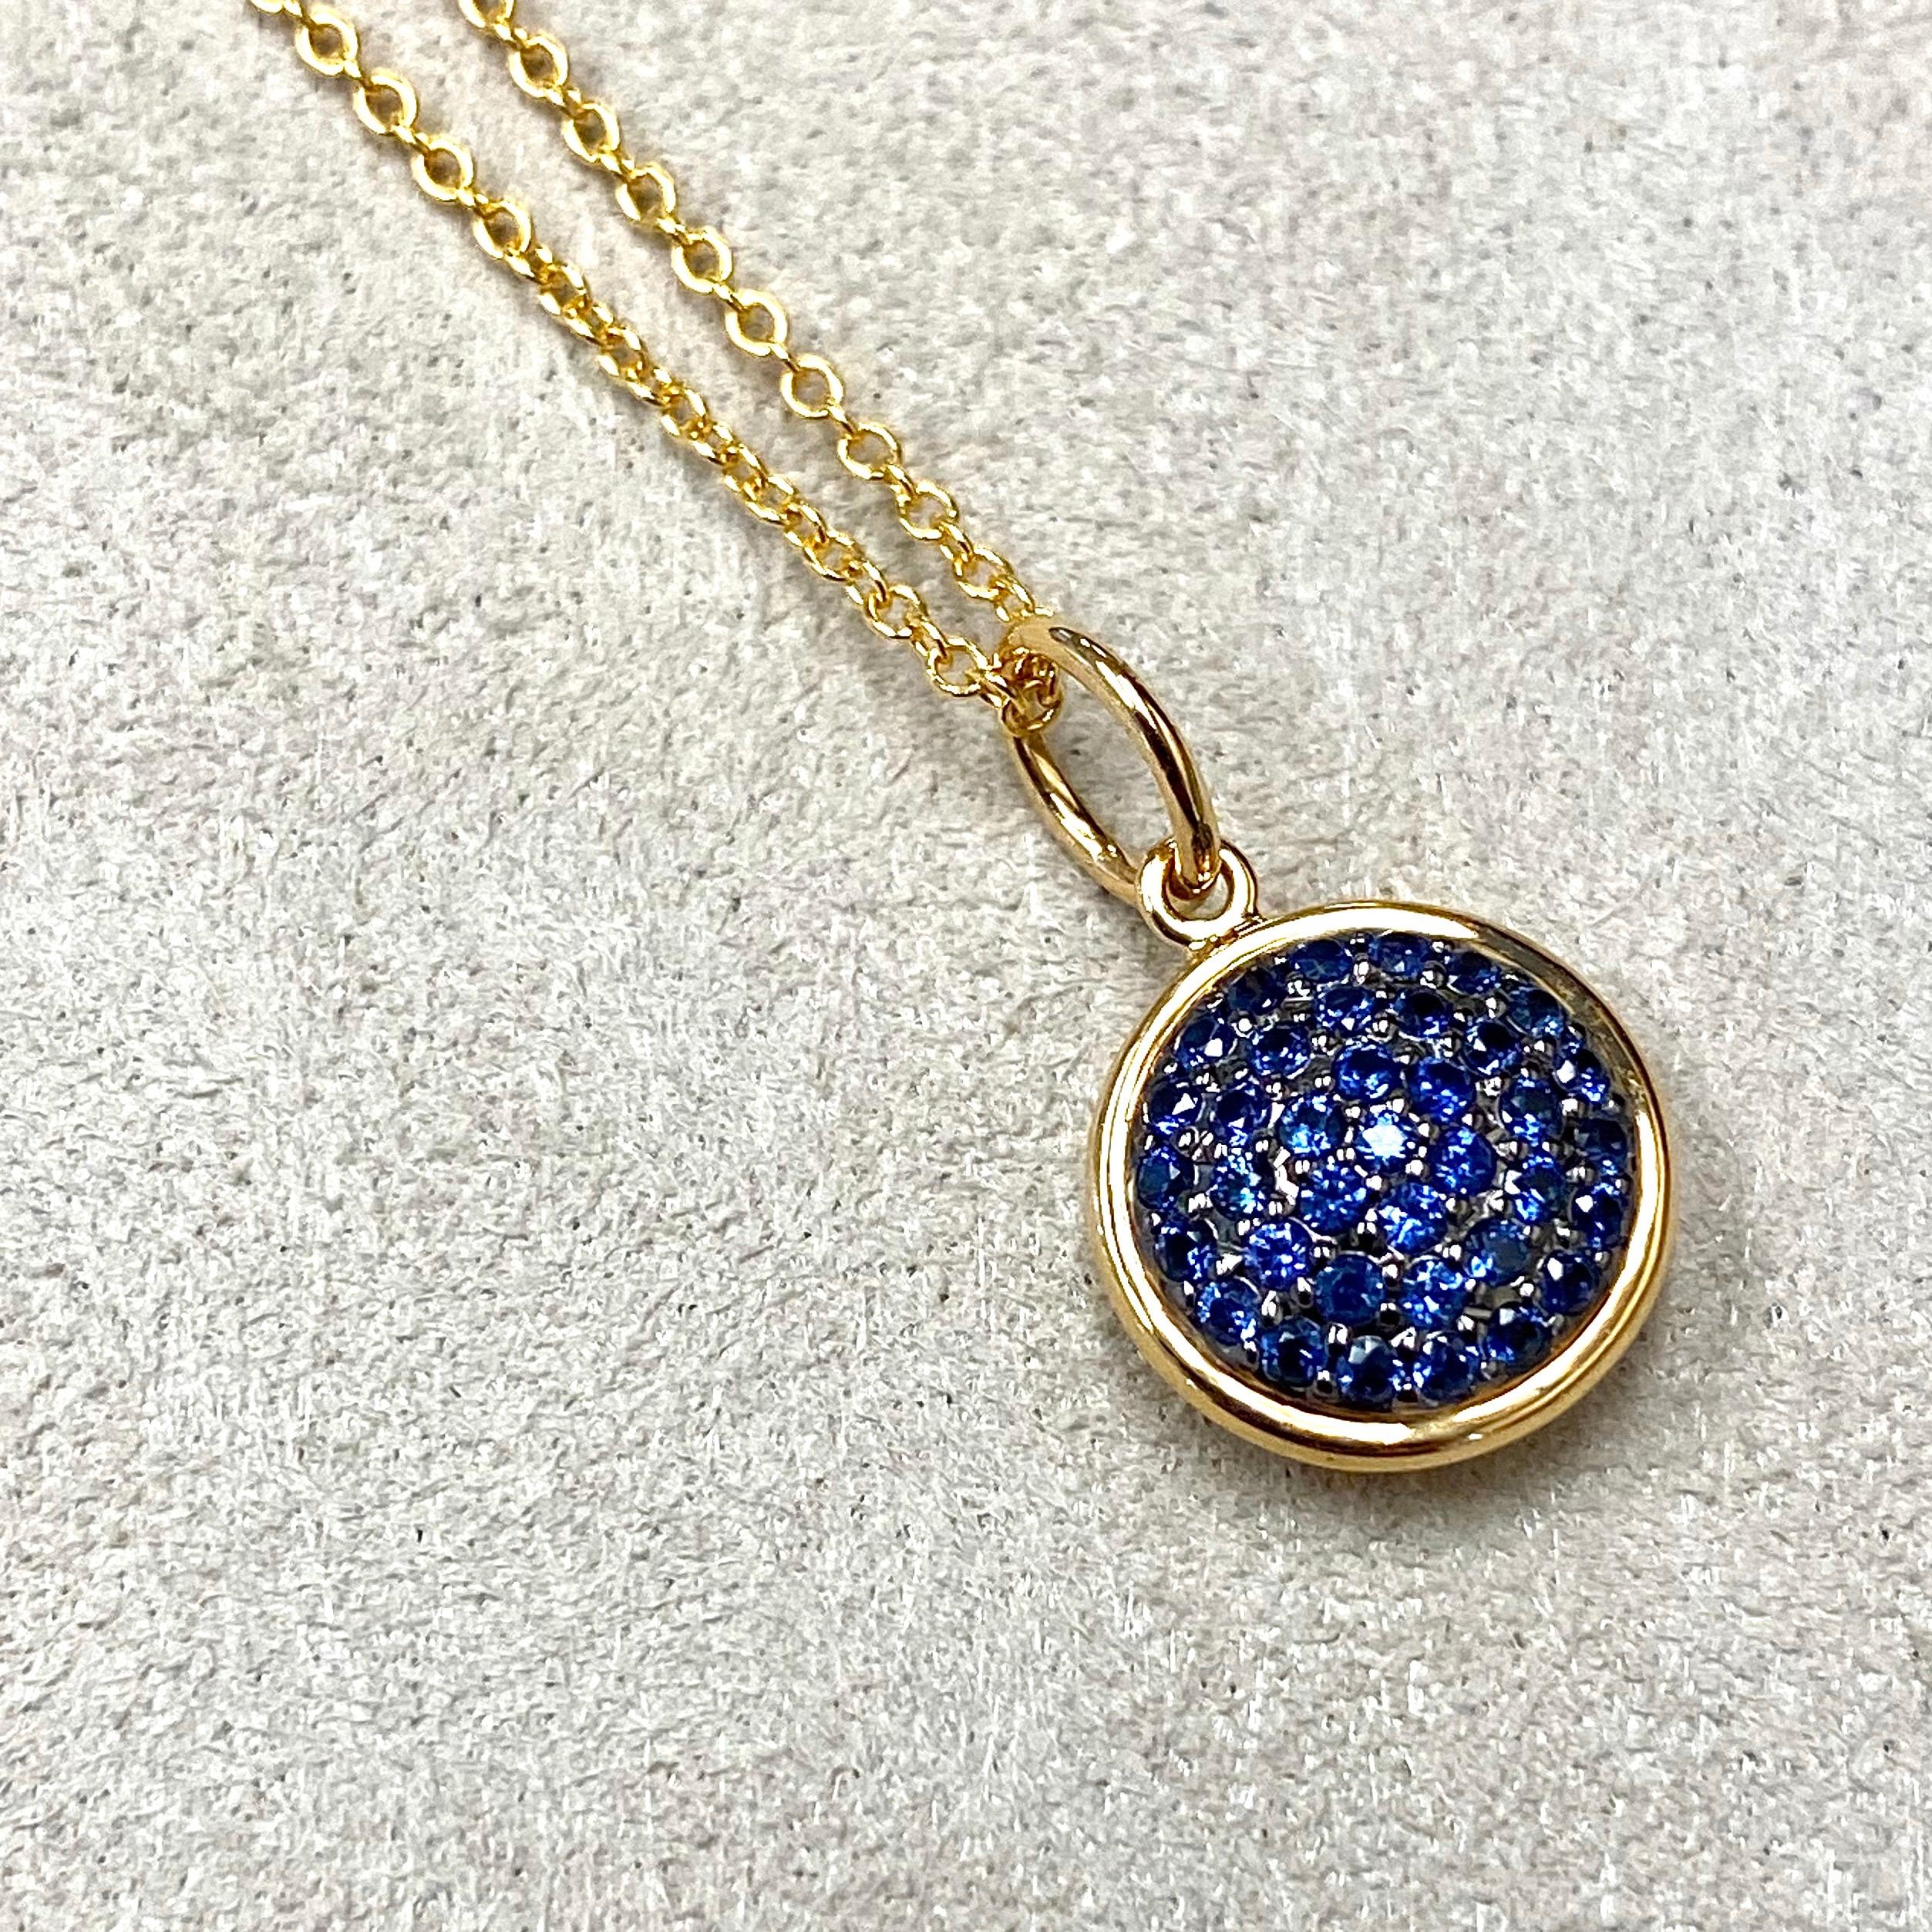 Created in 18 karat yellow gold
10 mm size charm
Blue Sapphires 0.30 ct approx
September birthstone
Chain sold separately 

Crafted from 18 karat yellow gold, this 10 mm pendant sparkles with 0.30 ct of blue sapphires, the birthstone for September.